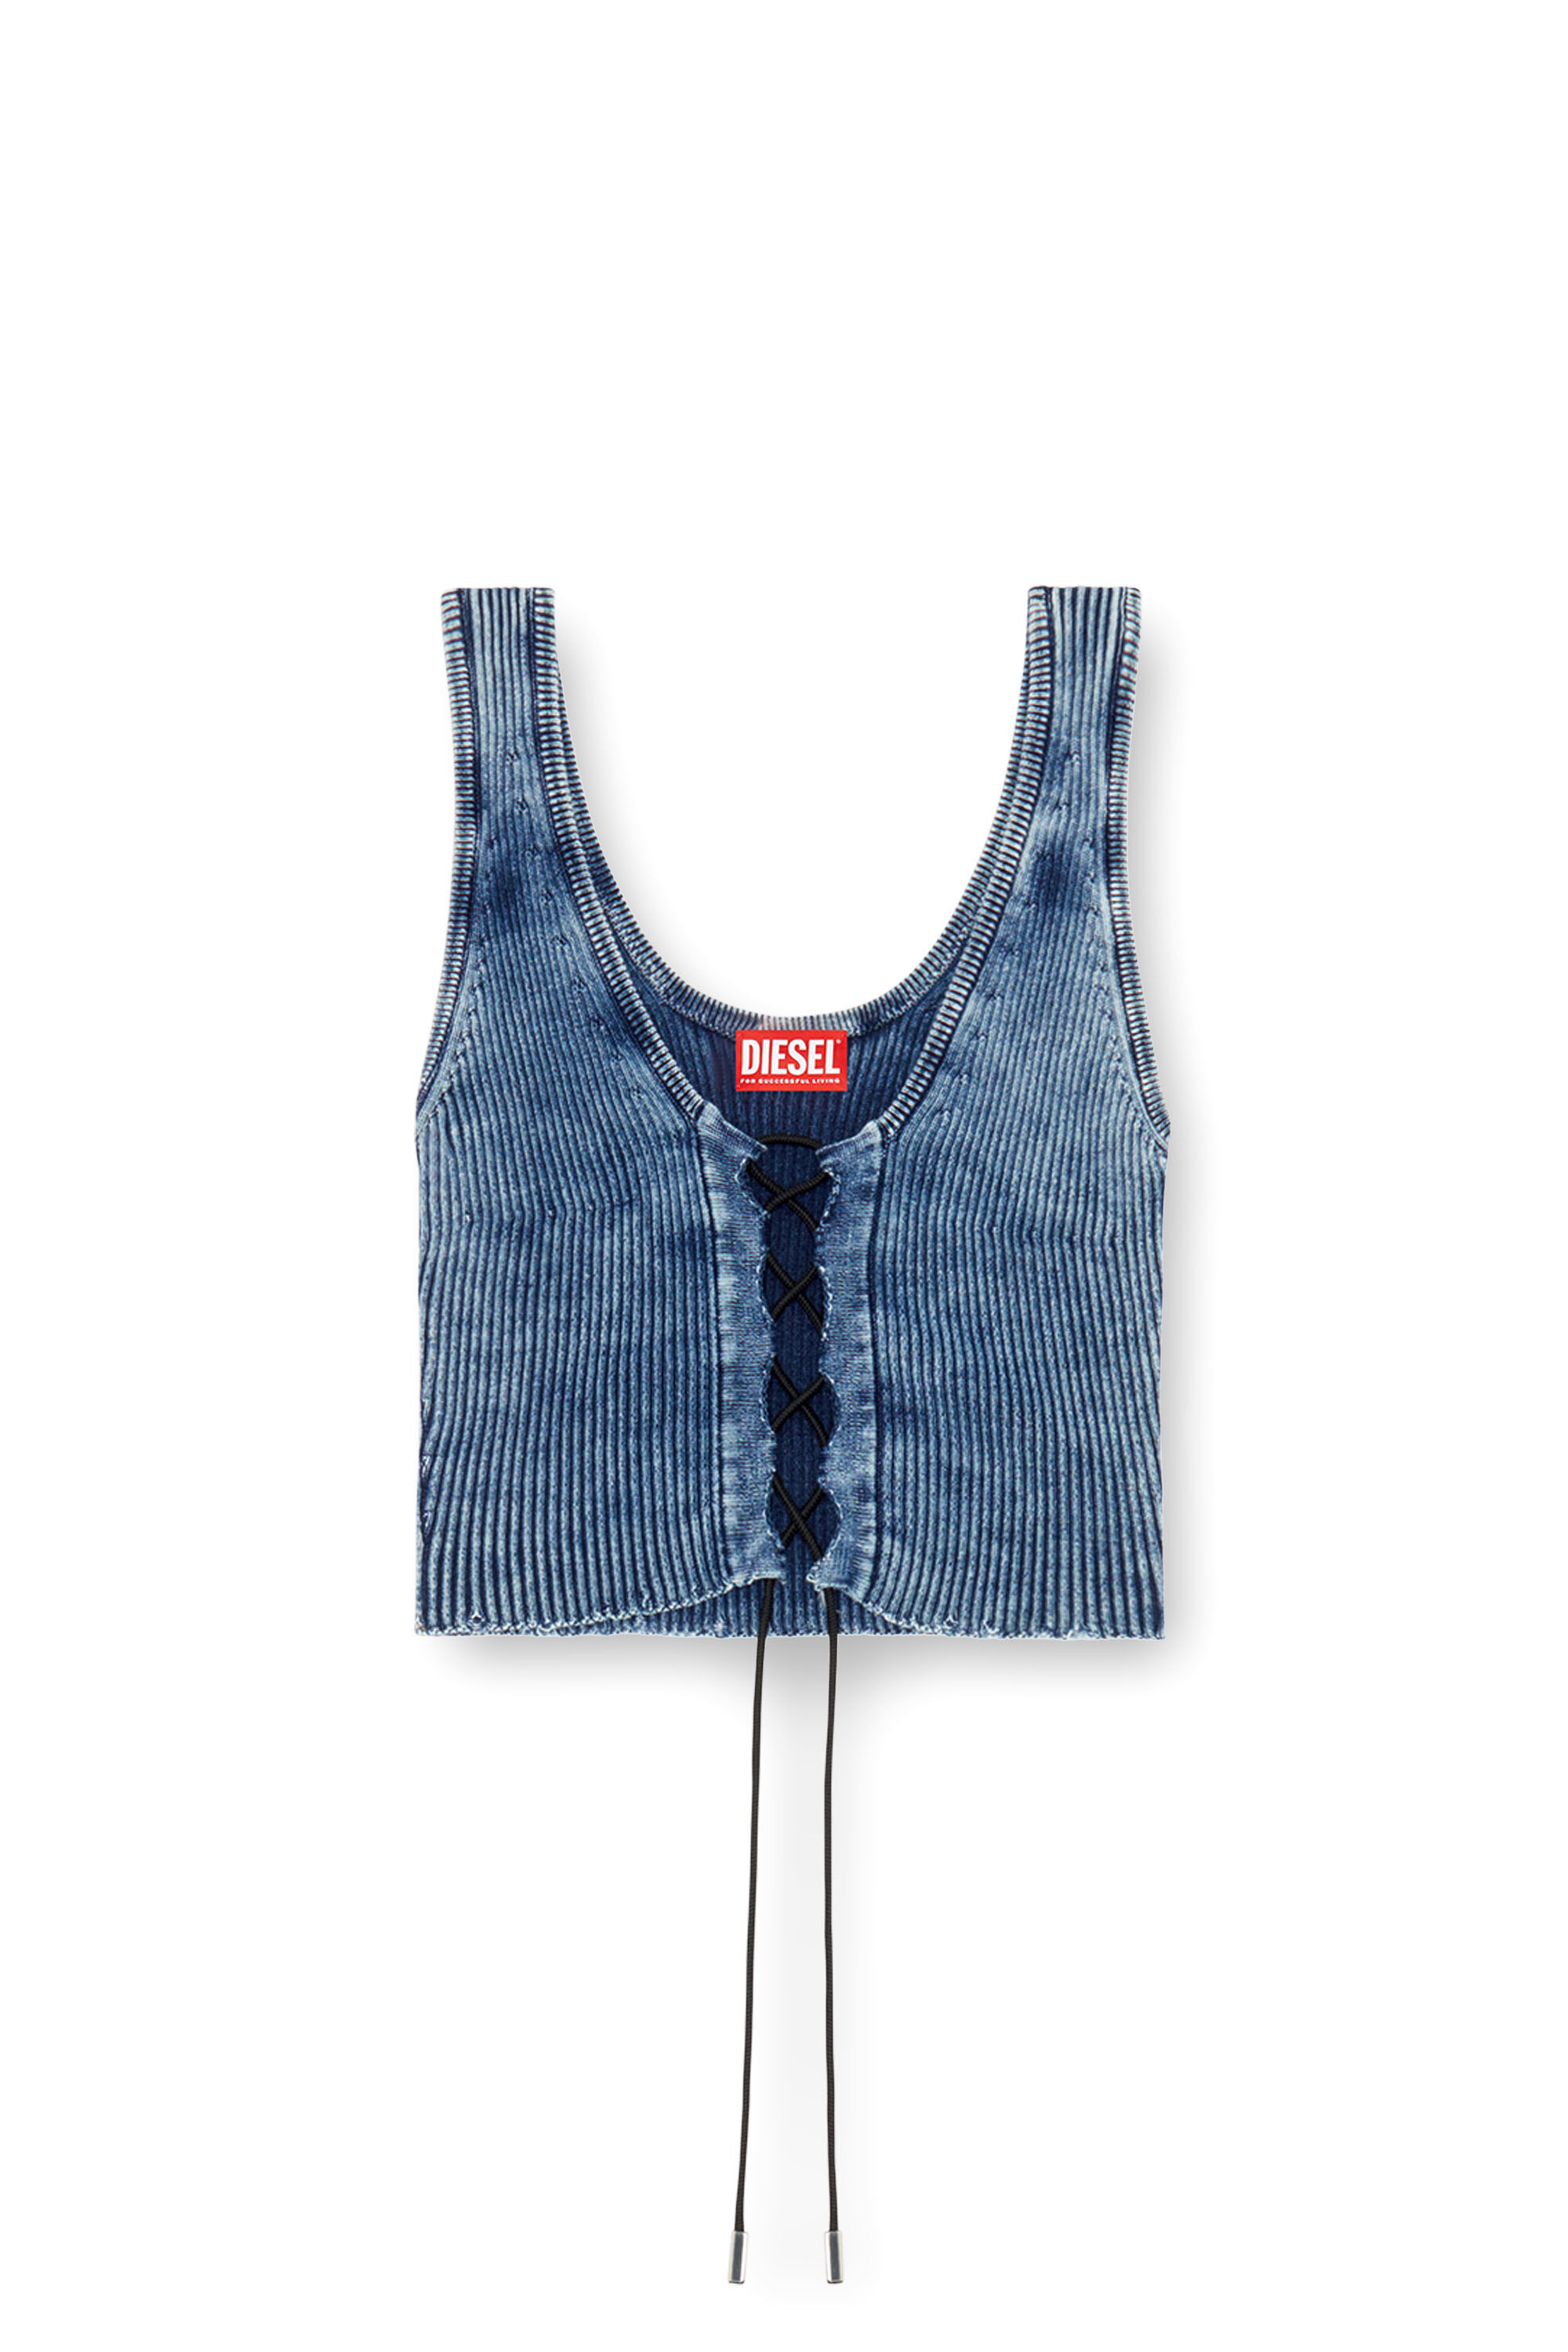 Diesel - M-ADONE, Female Cropped lace-up tank top in indigo knit in ブルー - Image 2